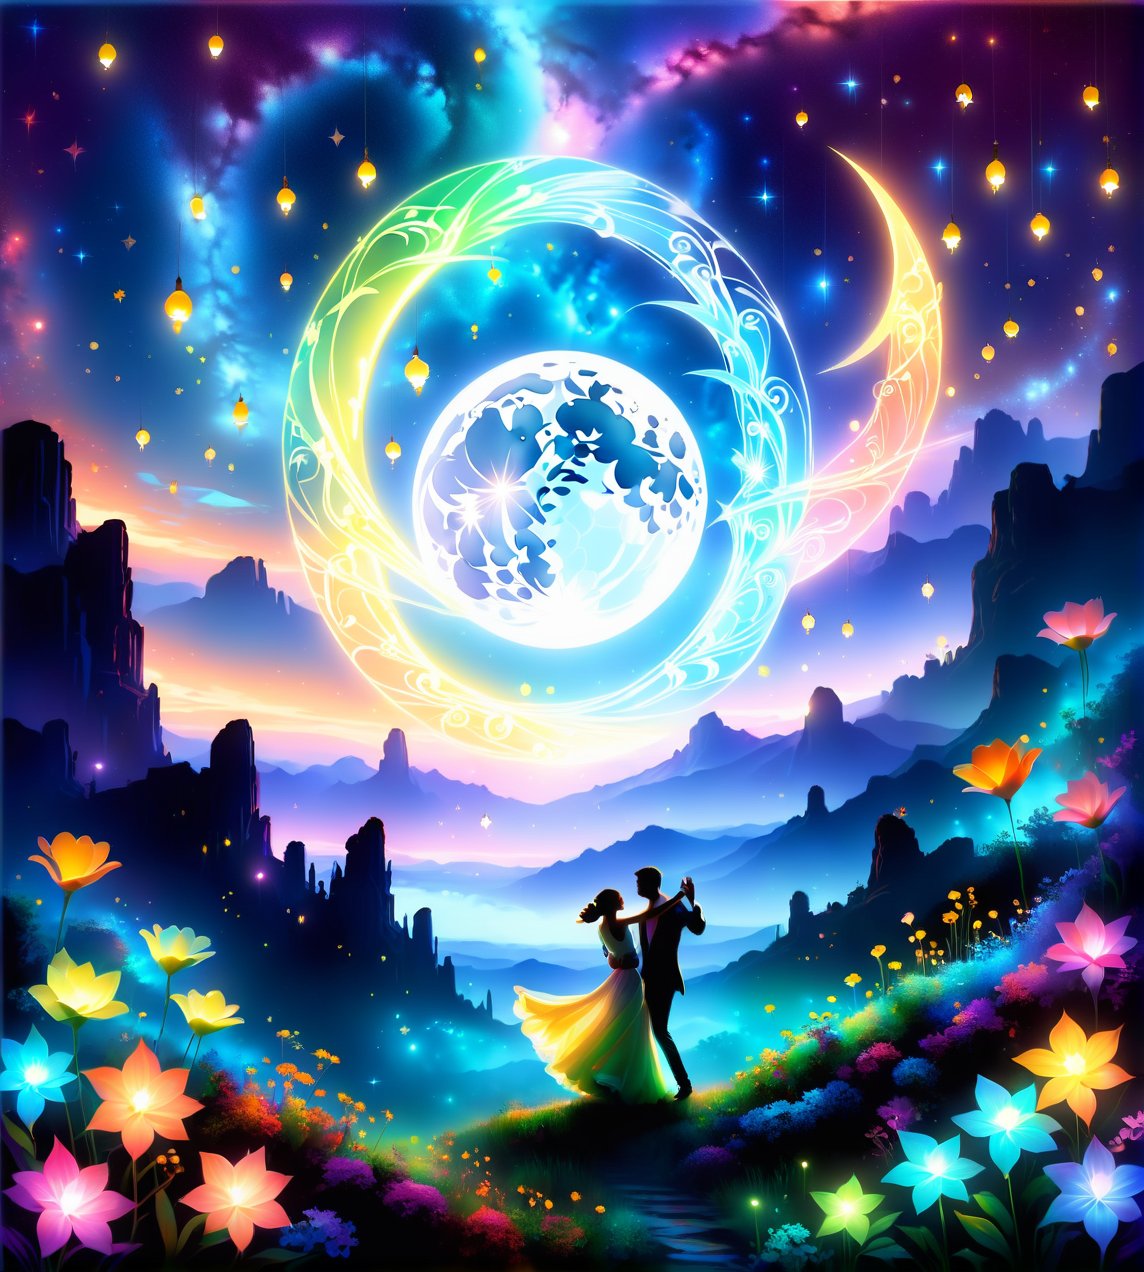 Nightfall serenade: Two silhouettes, swaying to the rhythm of their love story, amidst a whimsical backdrop of glowing flora. The young couple's tender dance is set against a star-studded sky, where the moon casts an ethereal glow. Bioluminescent flowers surround them, like tiny lanterns, as they lose themselves in each other's eyes. Capture the magic of this intimate moment, suspended in time, where love is the only light needed.

Something 'bout the night, girl
When you got the right girl
Dancing with you in my arms 
Lookin' at the sky, girl
Thinkin' 'bout why we're here
And where we're goin'
Baby, here we are and all I know is
It's a helluva life,Flora